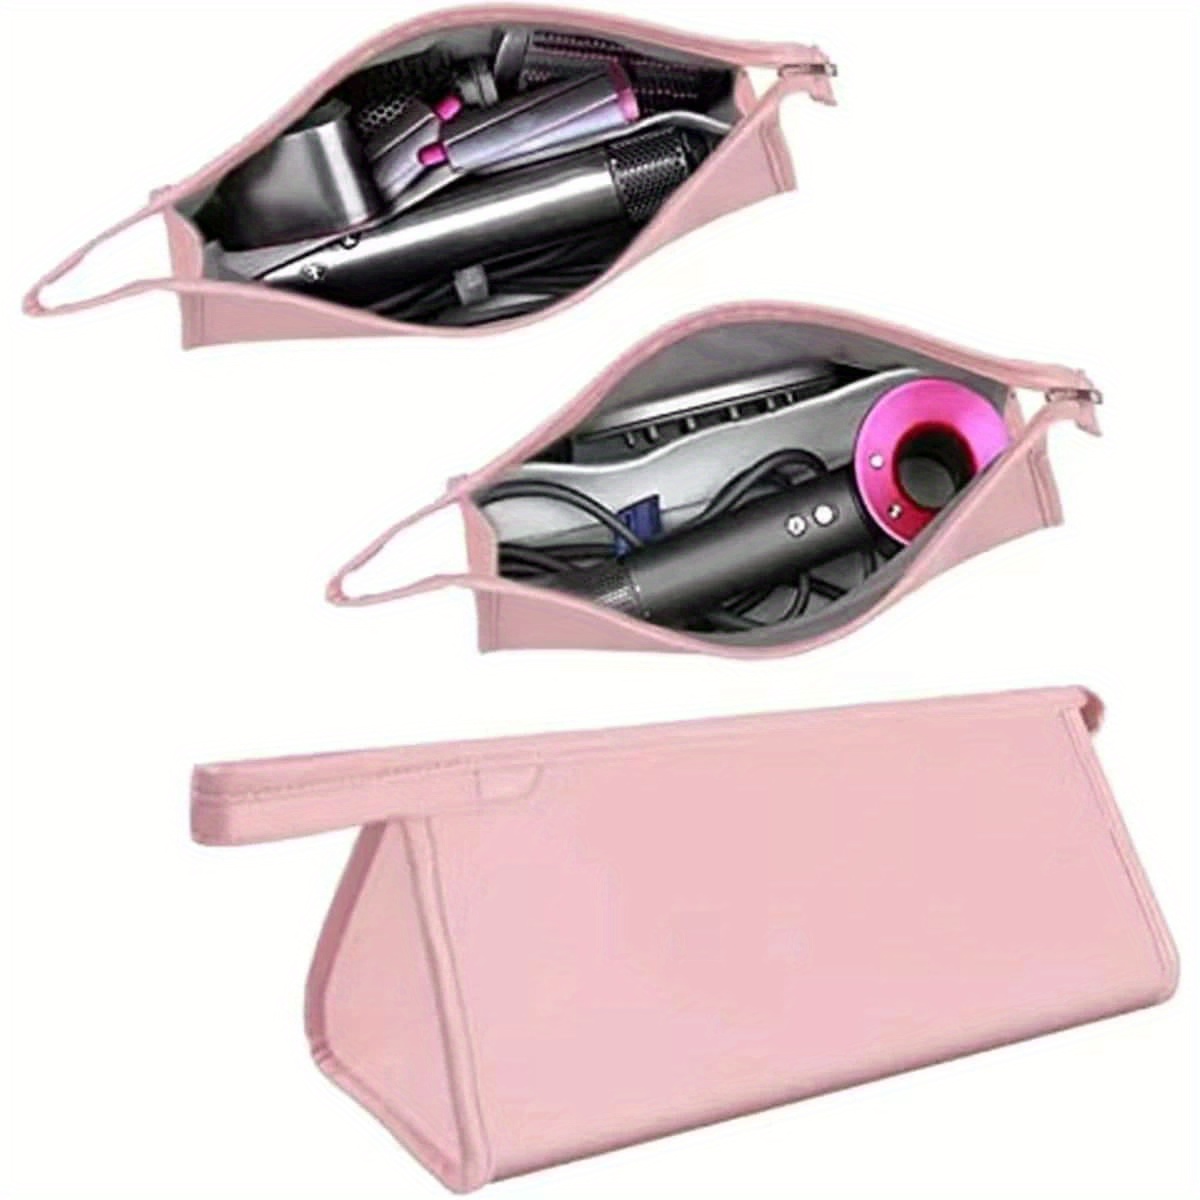 

1pc Travel Bag, Portable Carrying Bag For Hair Dryer, Waterproof